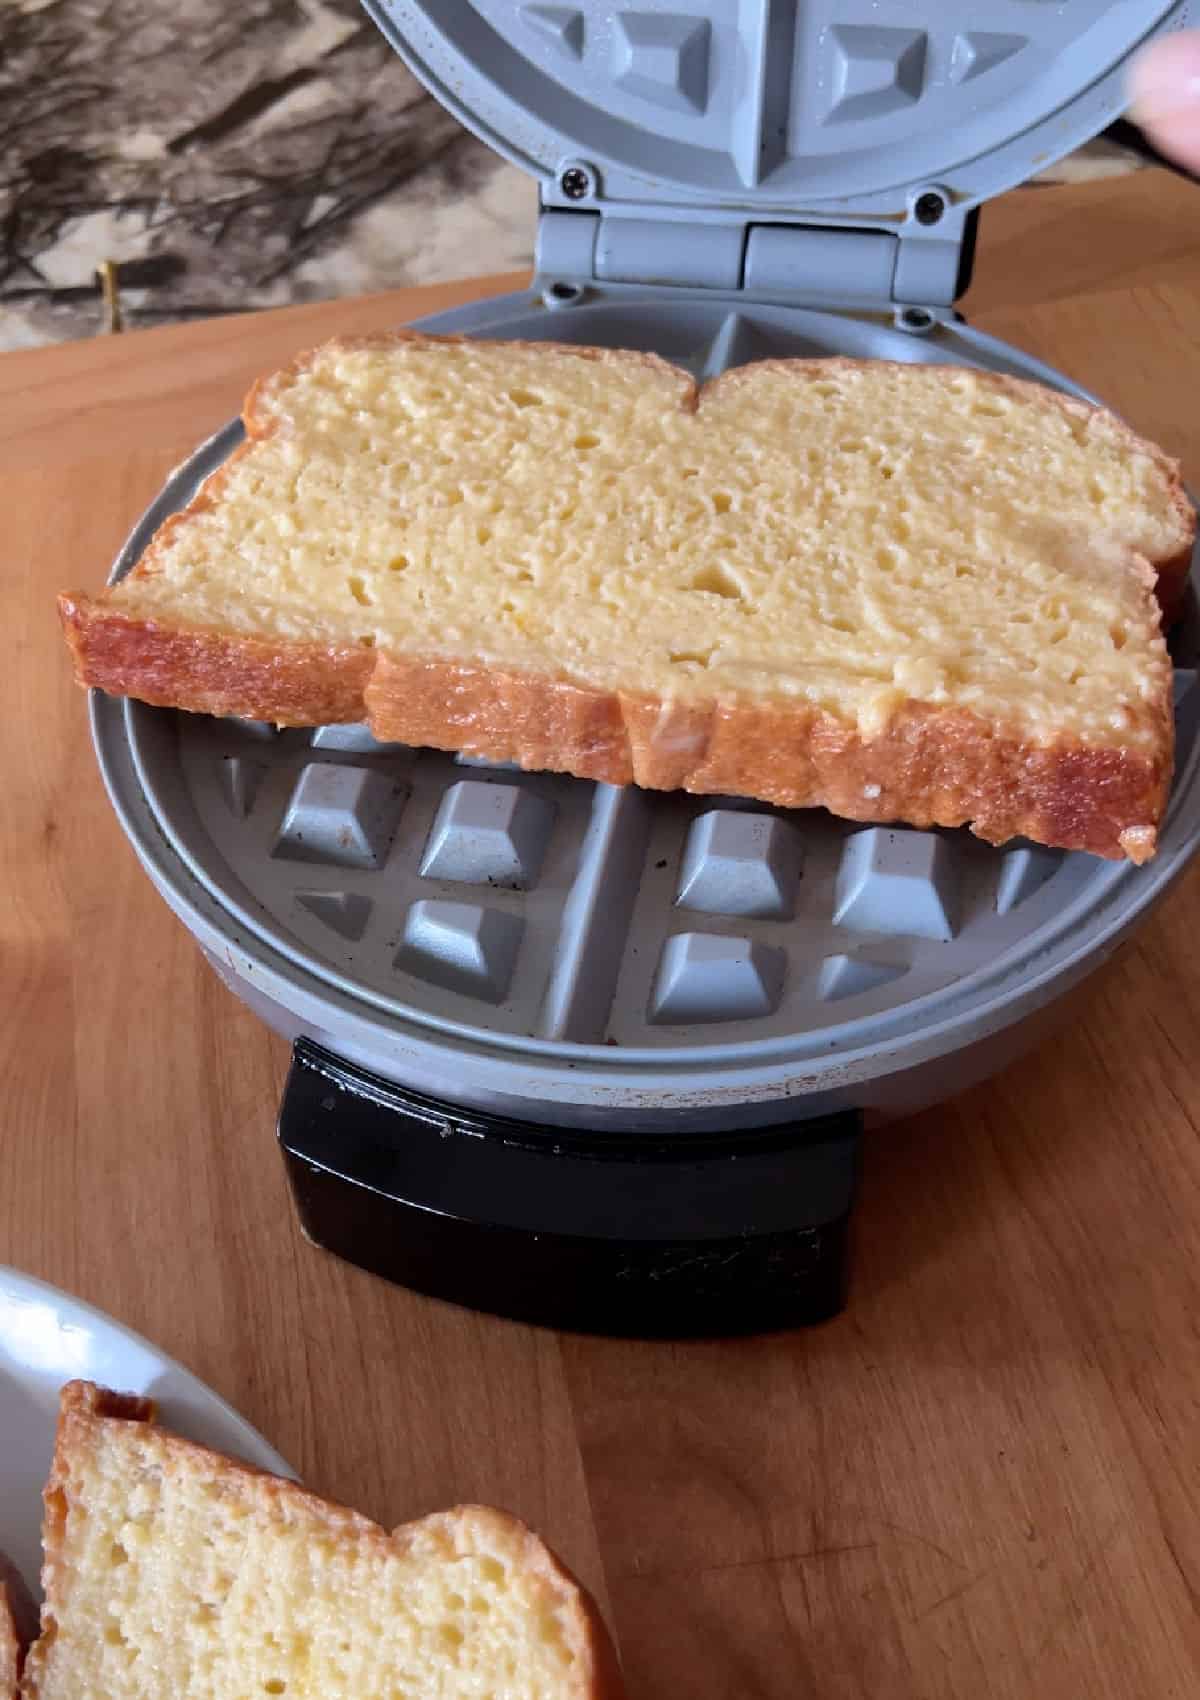 soaked bread placed in the waffle maker.